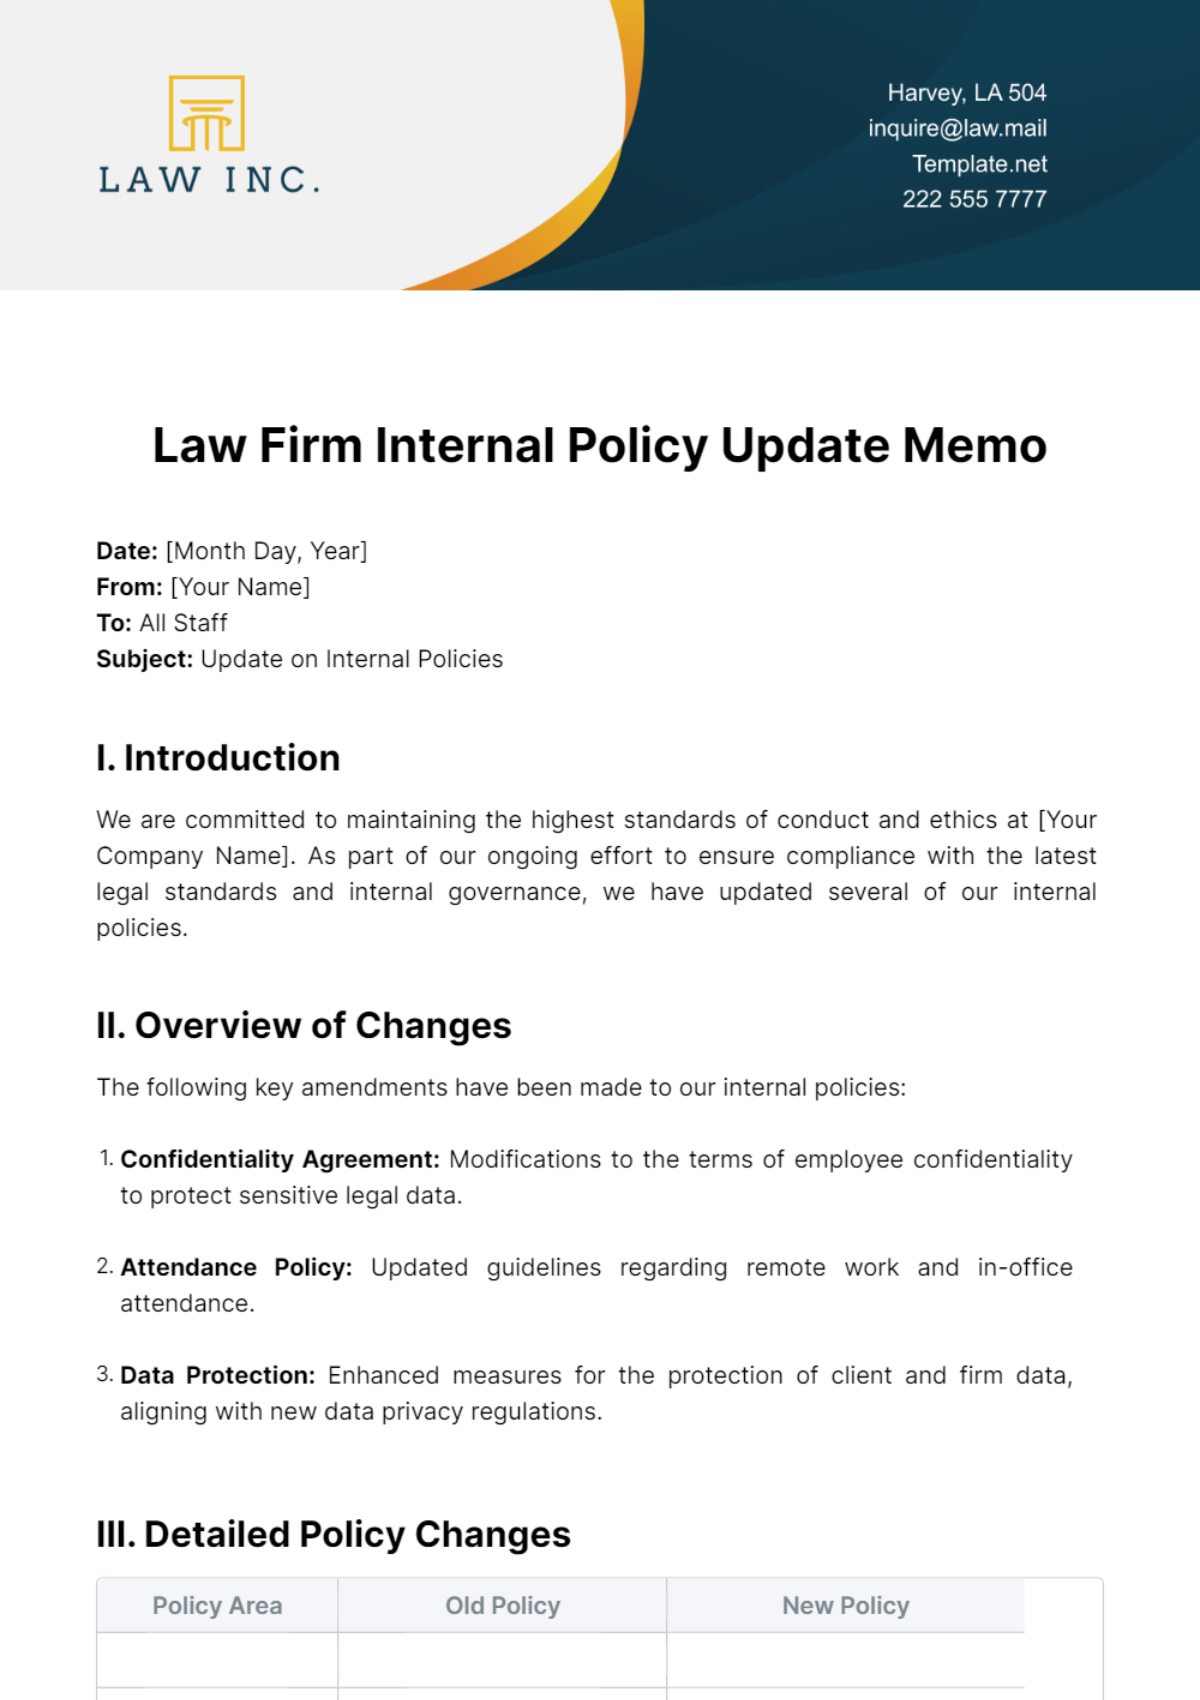 Free Law Firm Internal Policy Update Memo Template